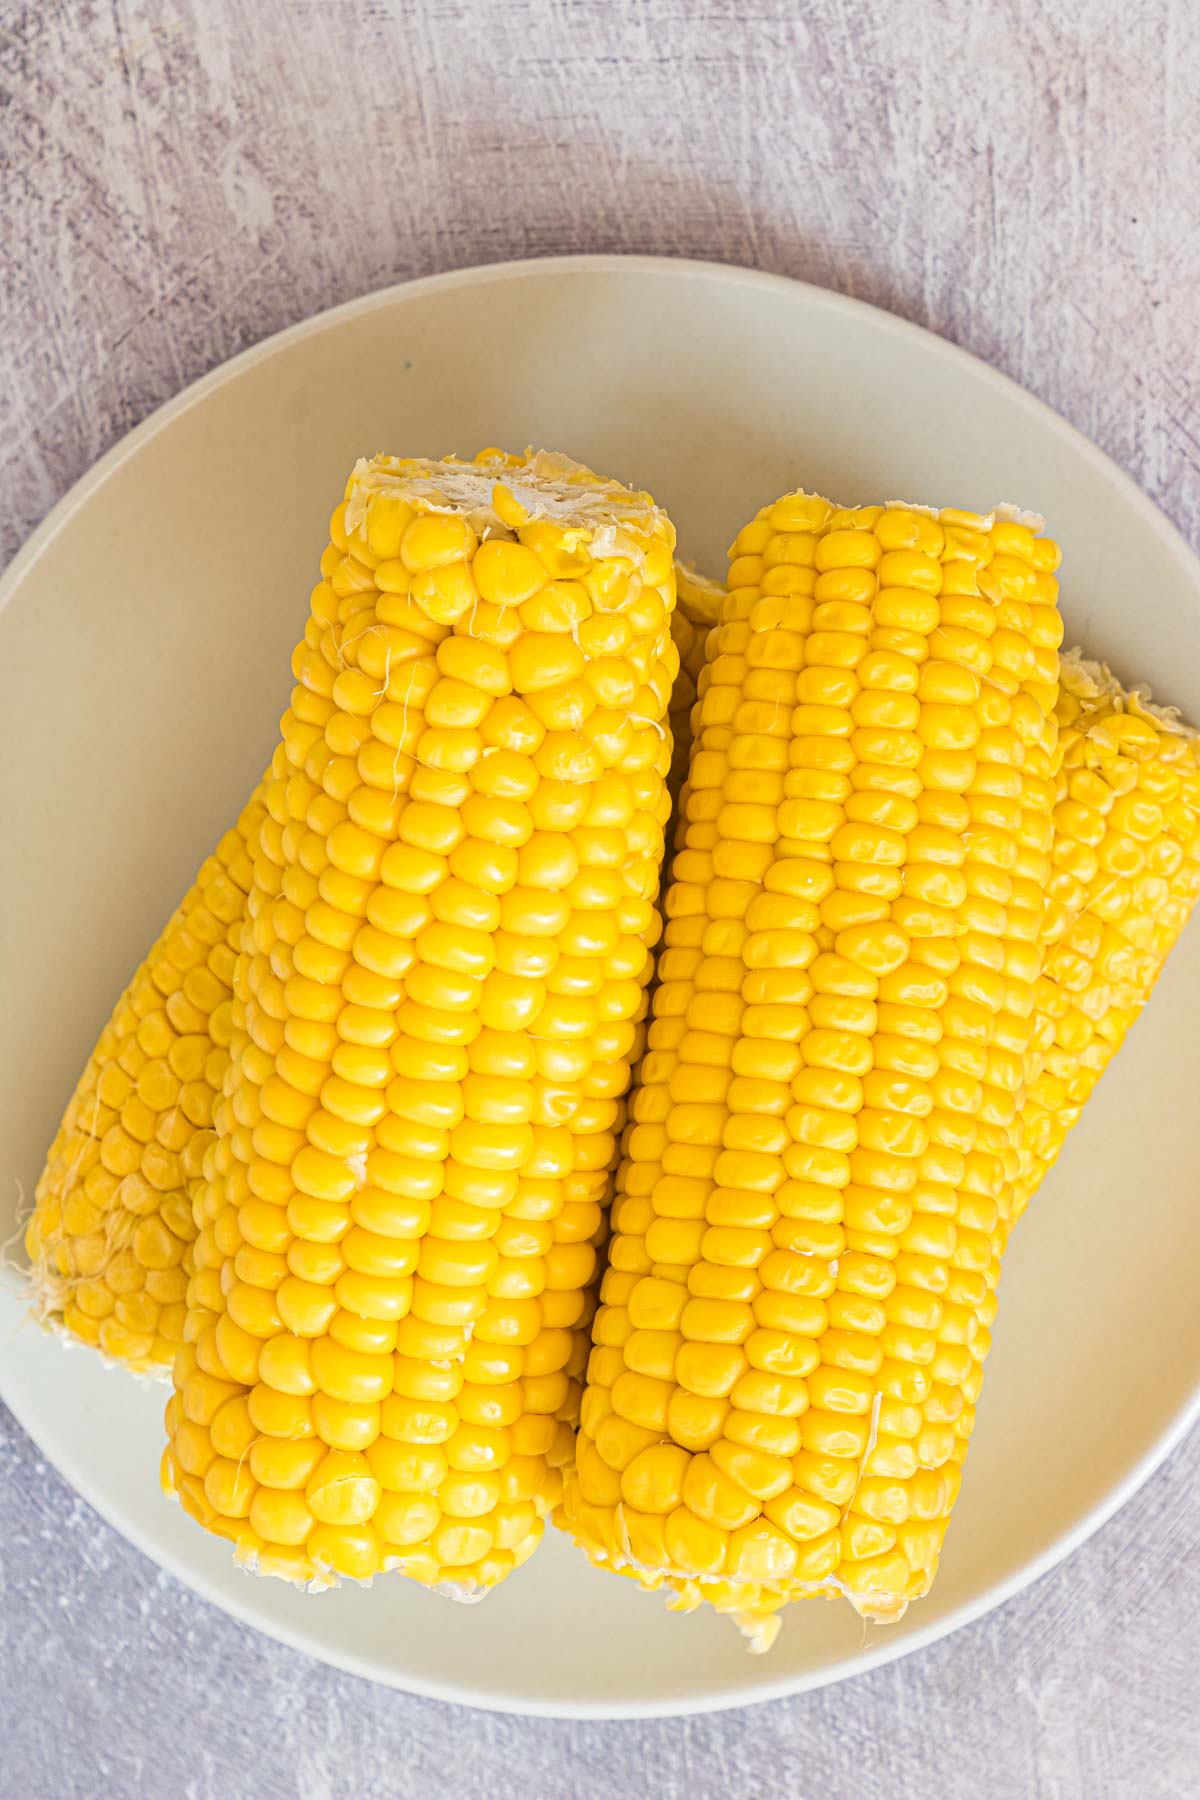 top down view of the completed how to microwave corn on the cob recipe